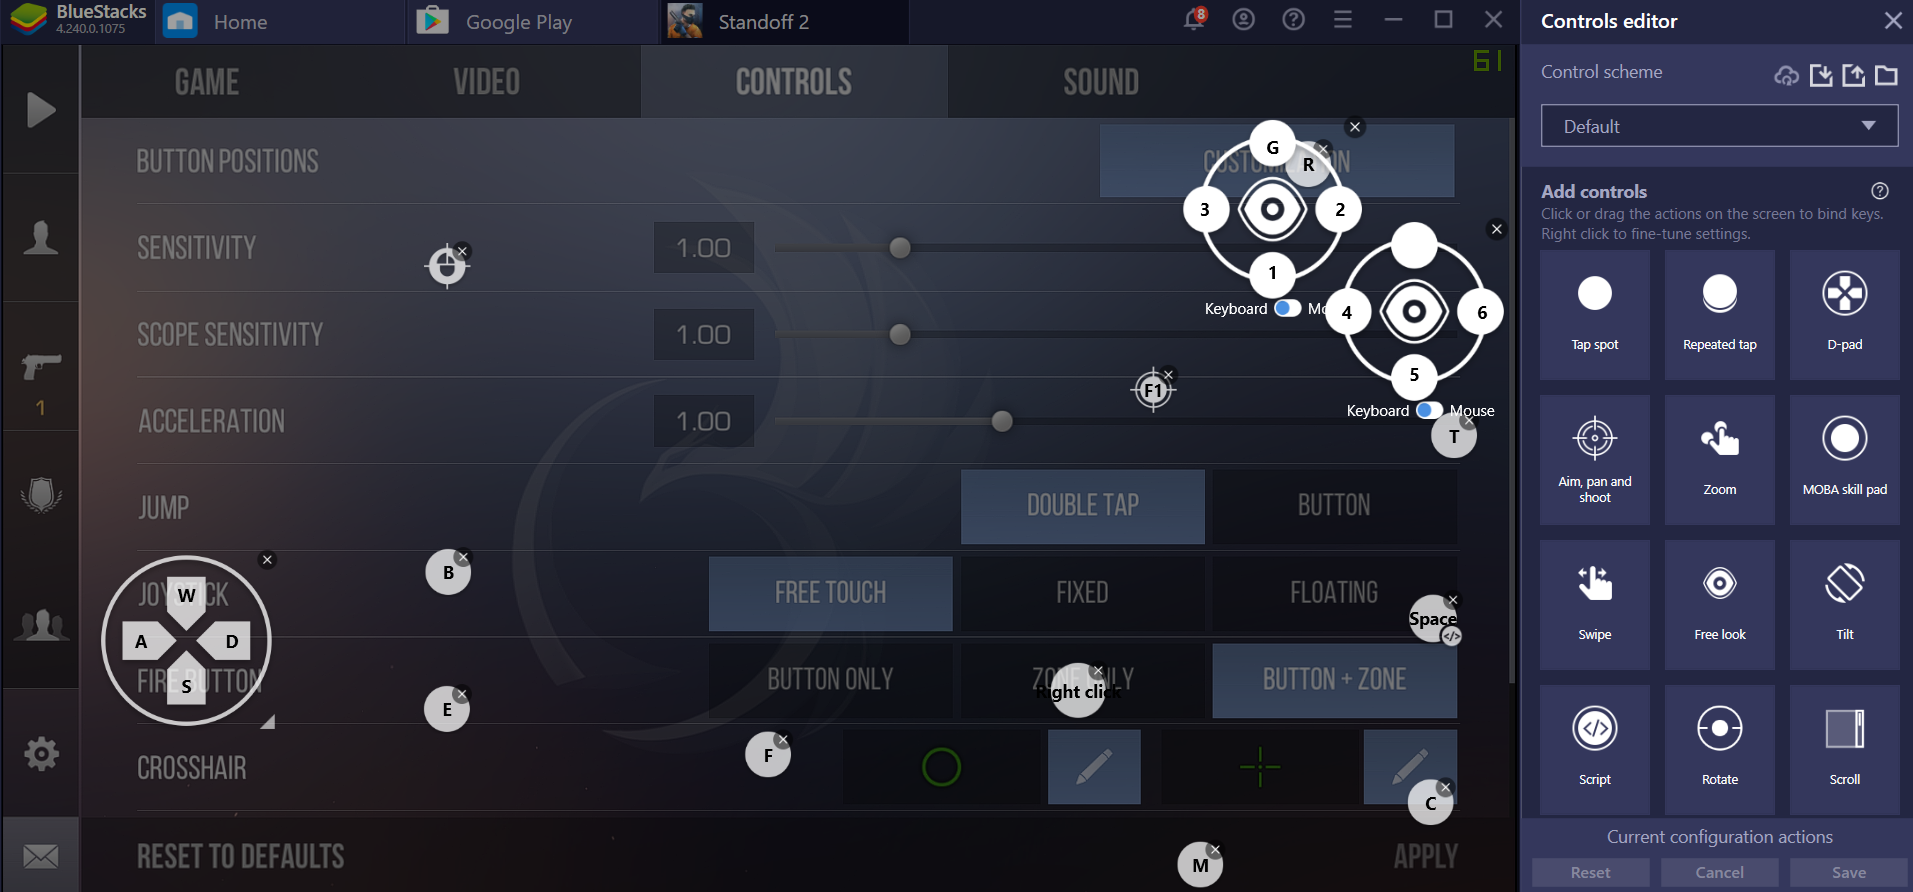 Standoff 2 on PC: Tips and Tricks to Improve Your Gameplay on BlueStacks